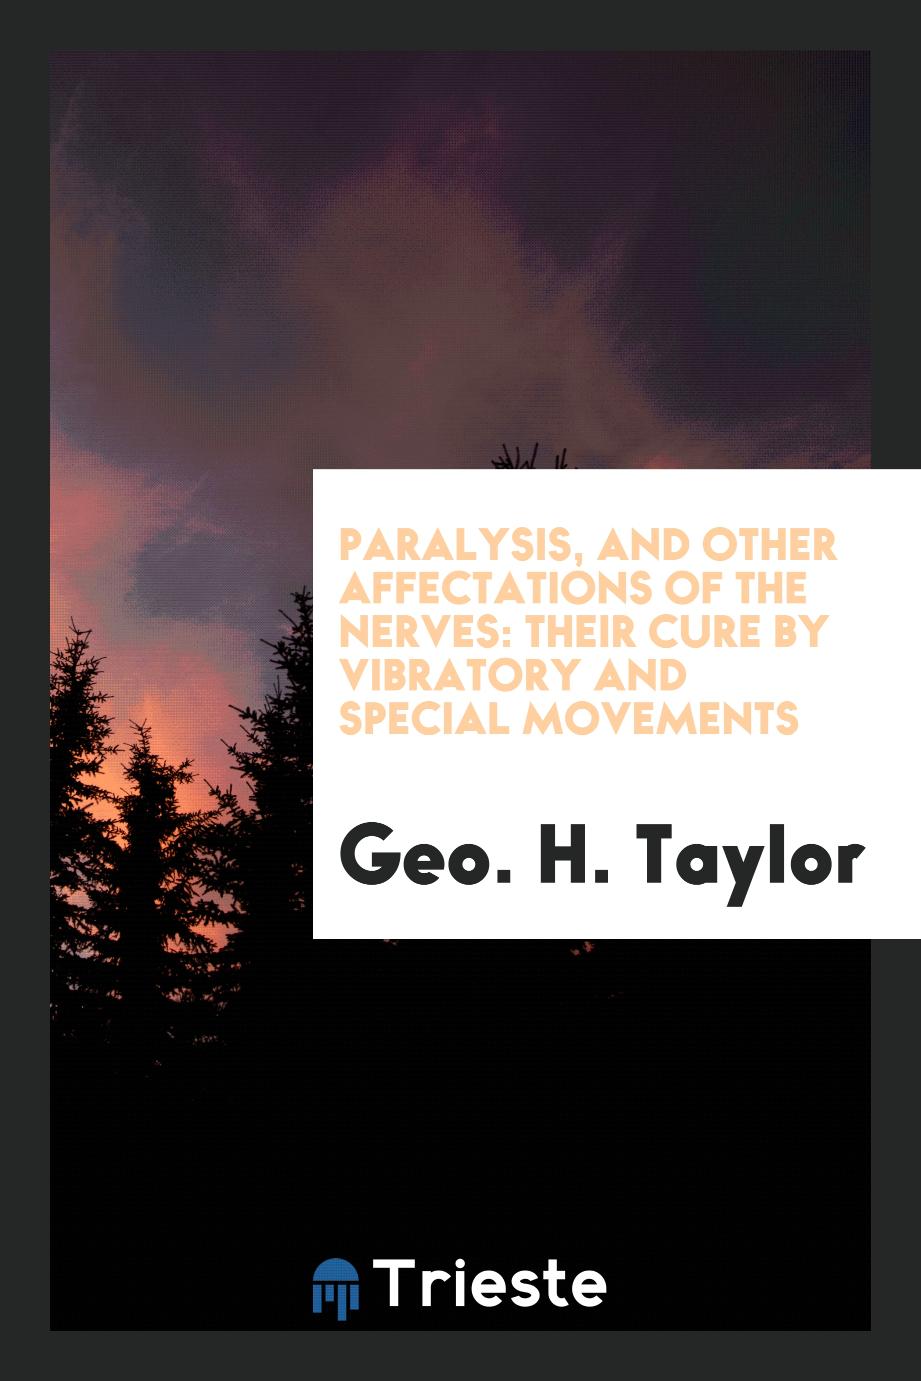 Paralysis, and Other Affectations of the Nerves: Their Cure by Vibratory and Special Movements